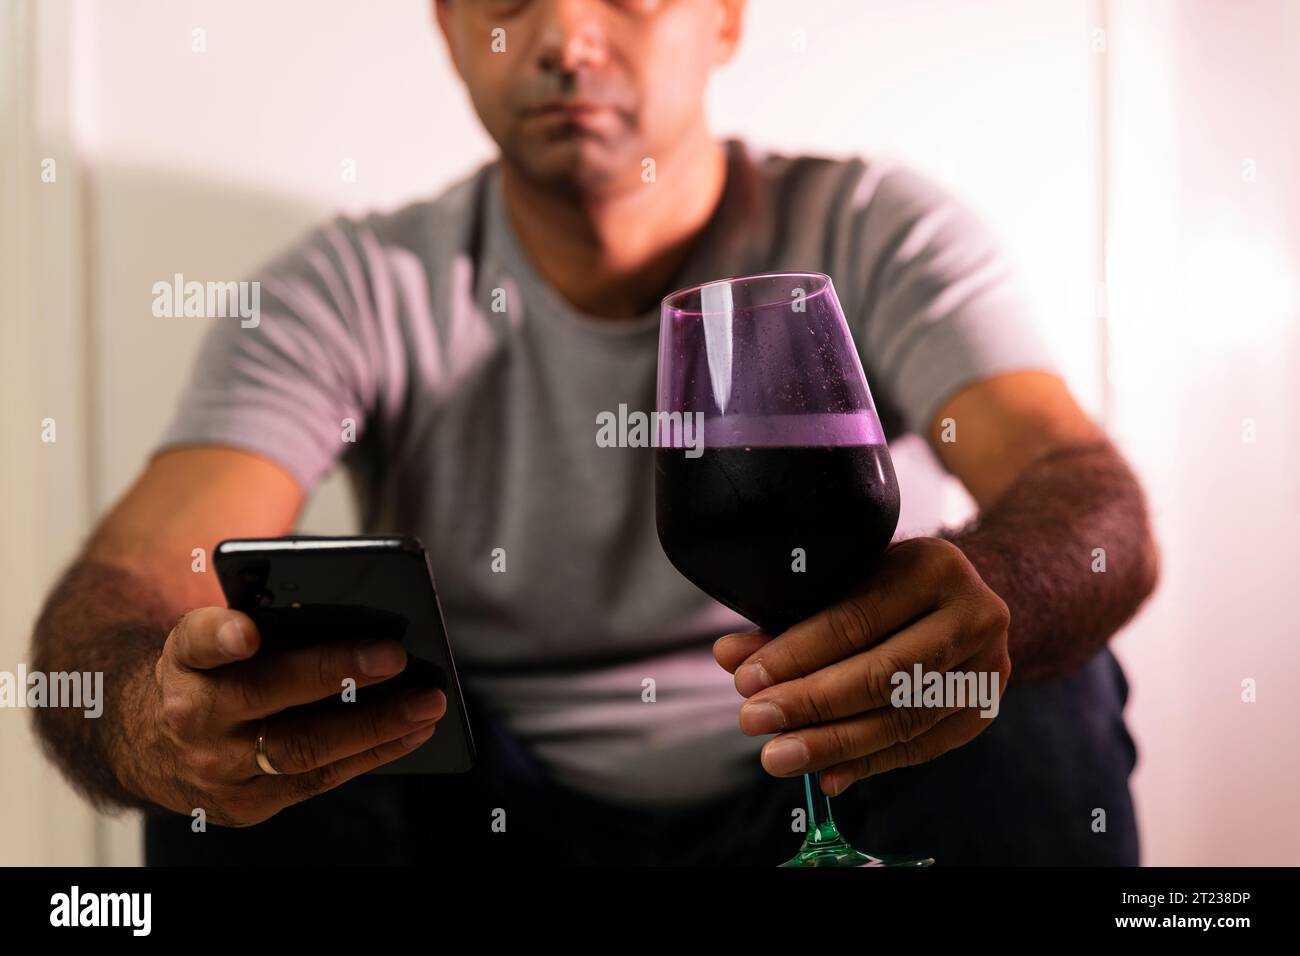 Bobo lifestyle of an unrecognizable caucasian man holding wineglass and texting from a smartphone. Stock Photo